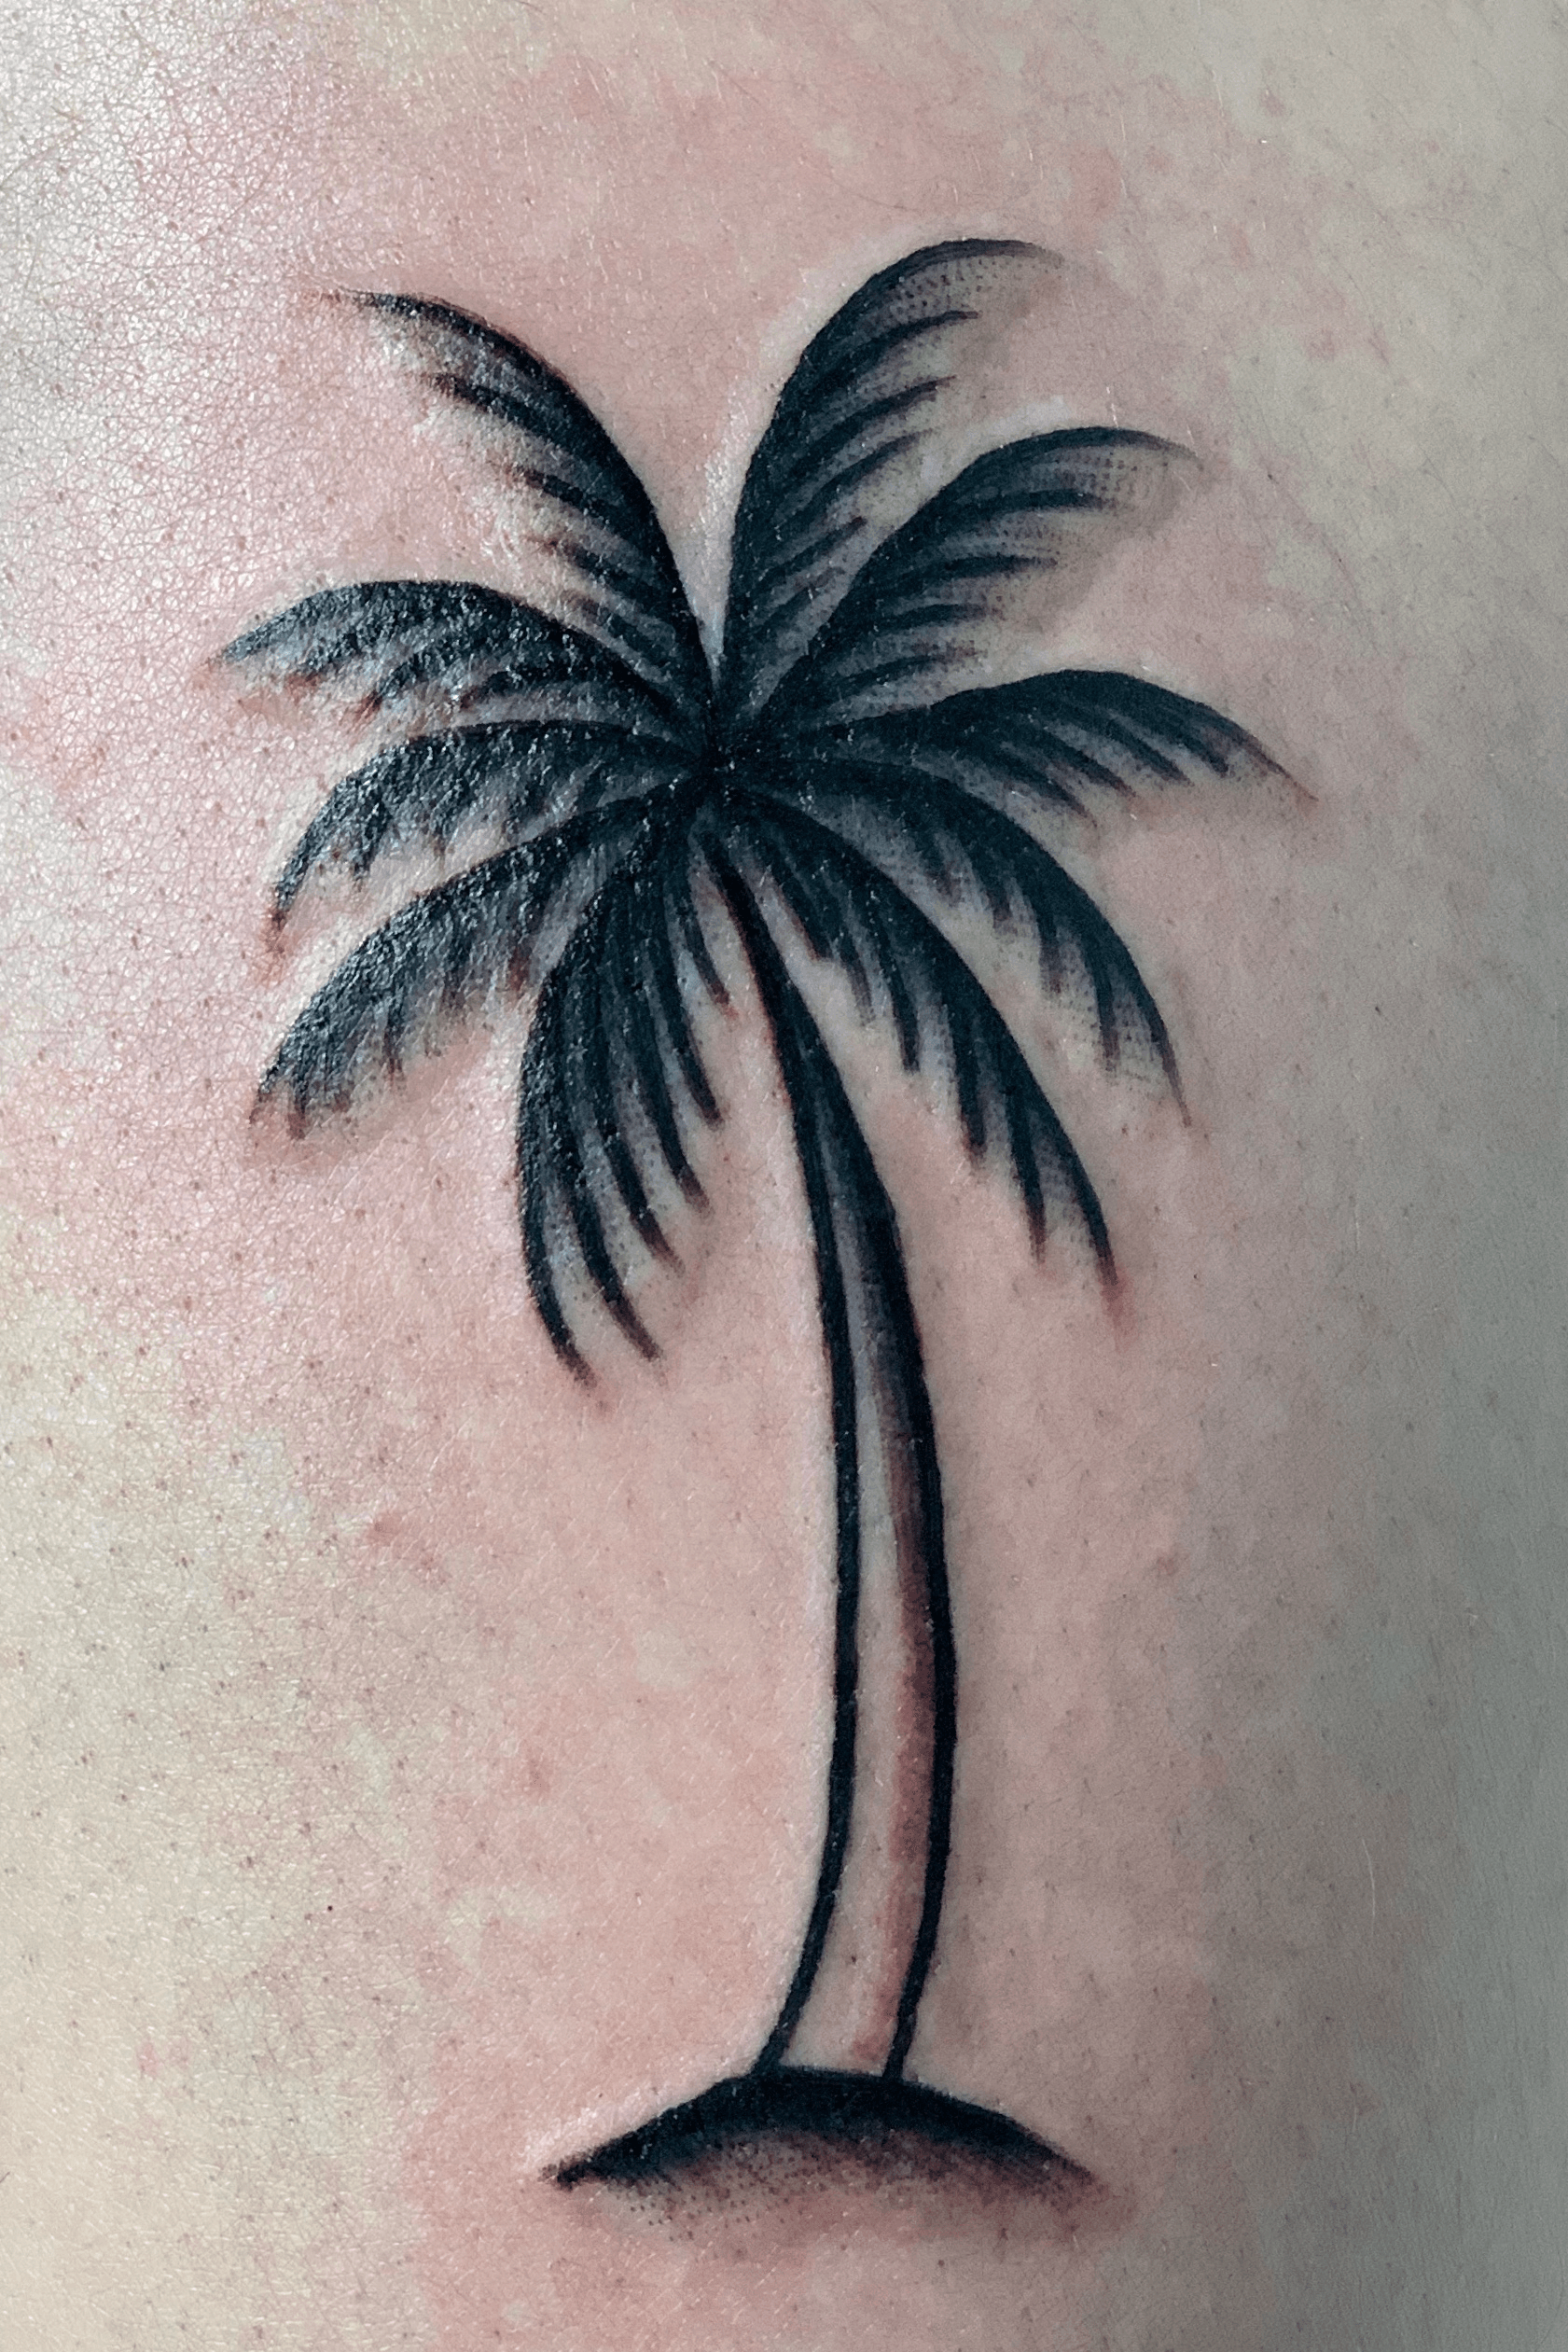 The California Dream Tattoos  Pretty palm tree by thatboyvince    whos planning on getting tattoos at The California Dream one day   Facebook